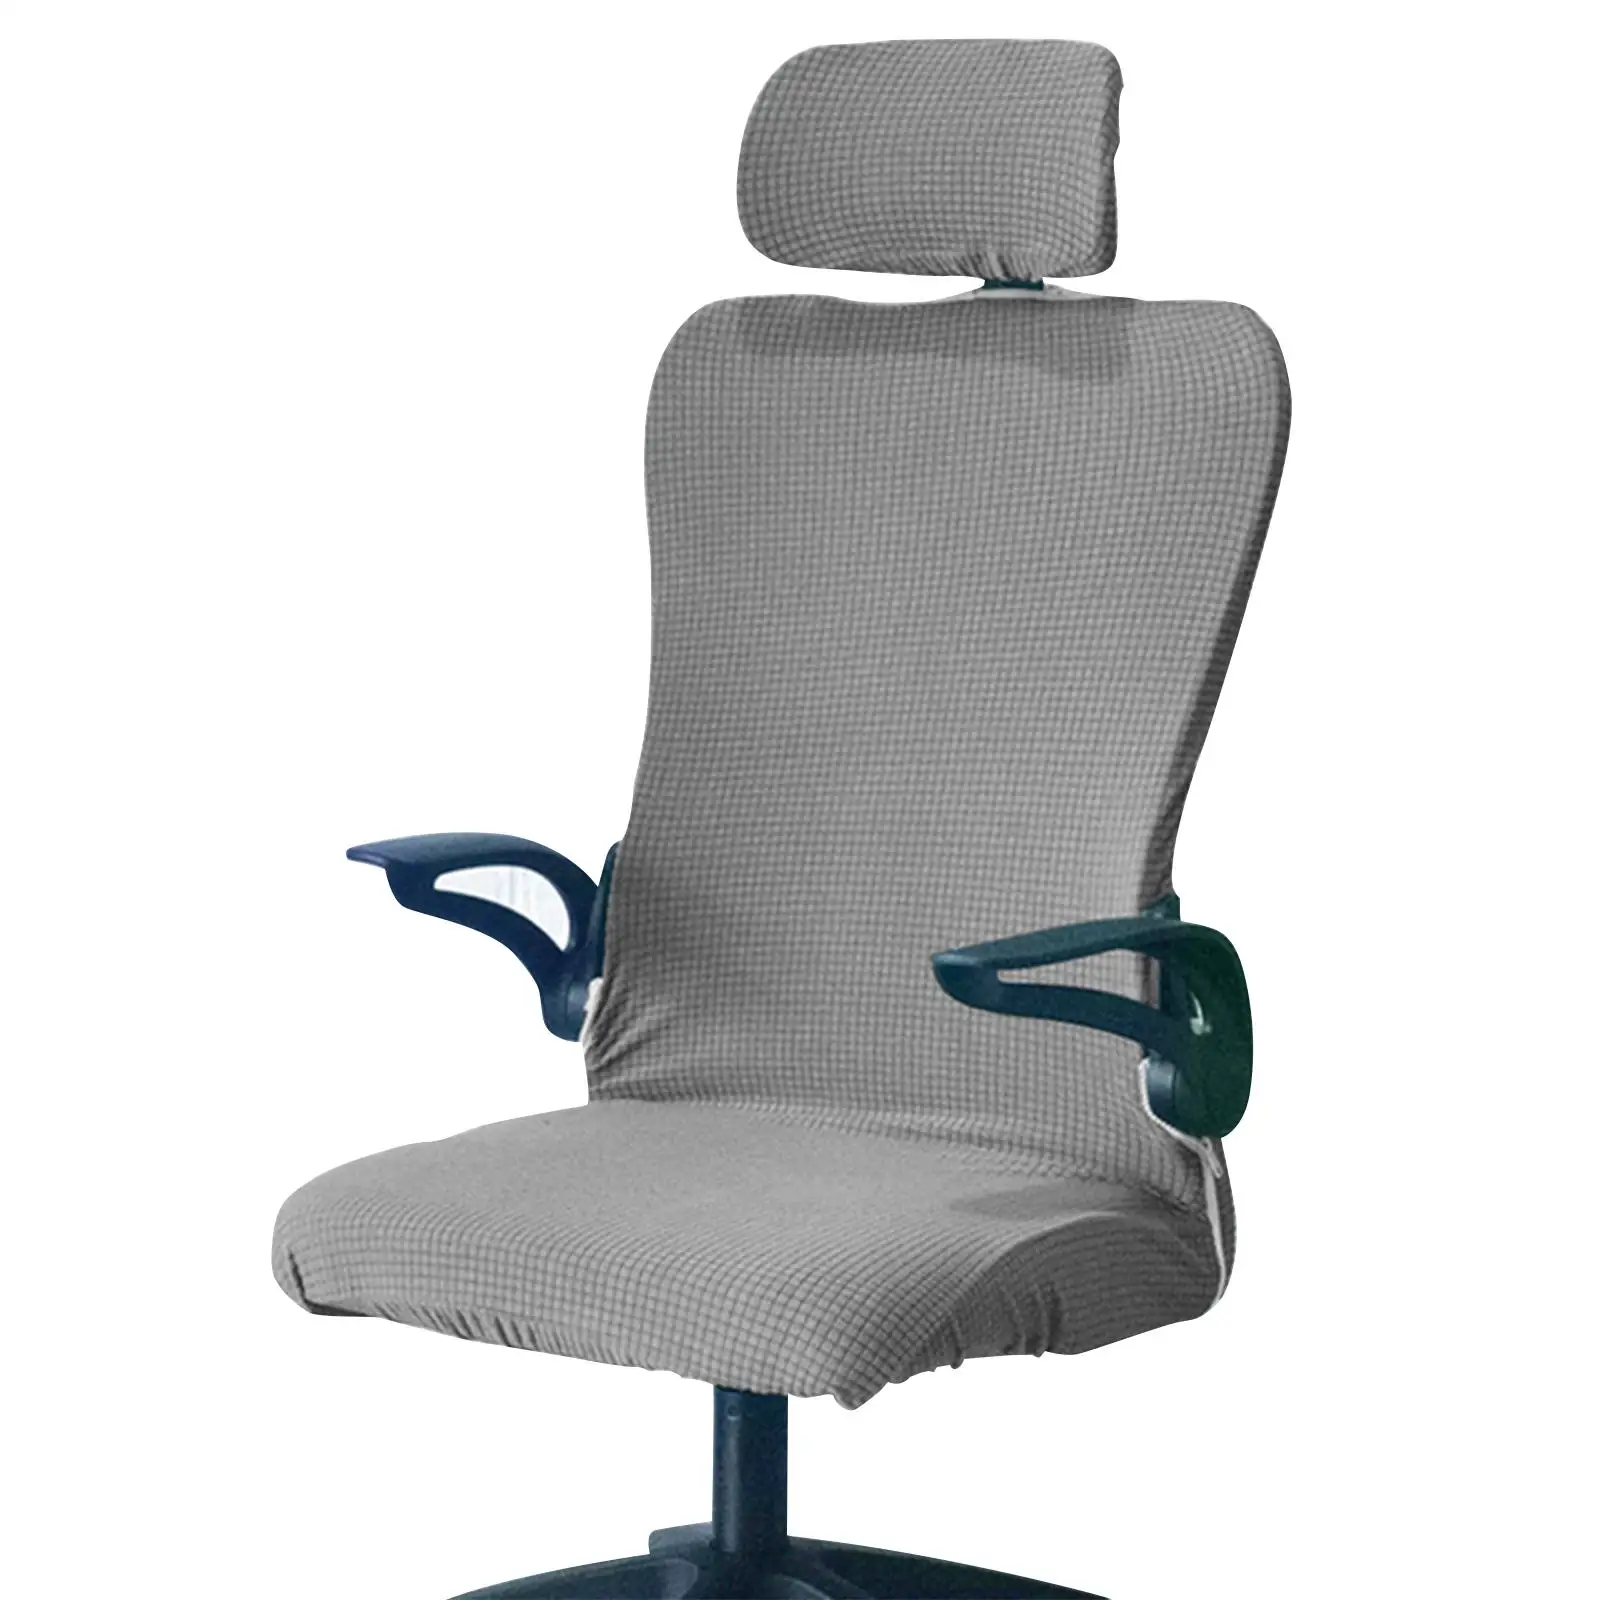 Office Chair Seat Covers with Headrest cover Chair Slipcovers for Home